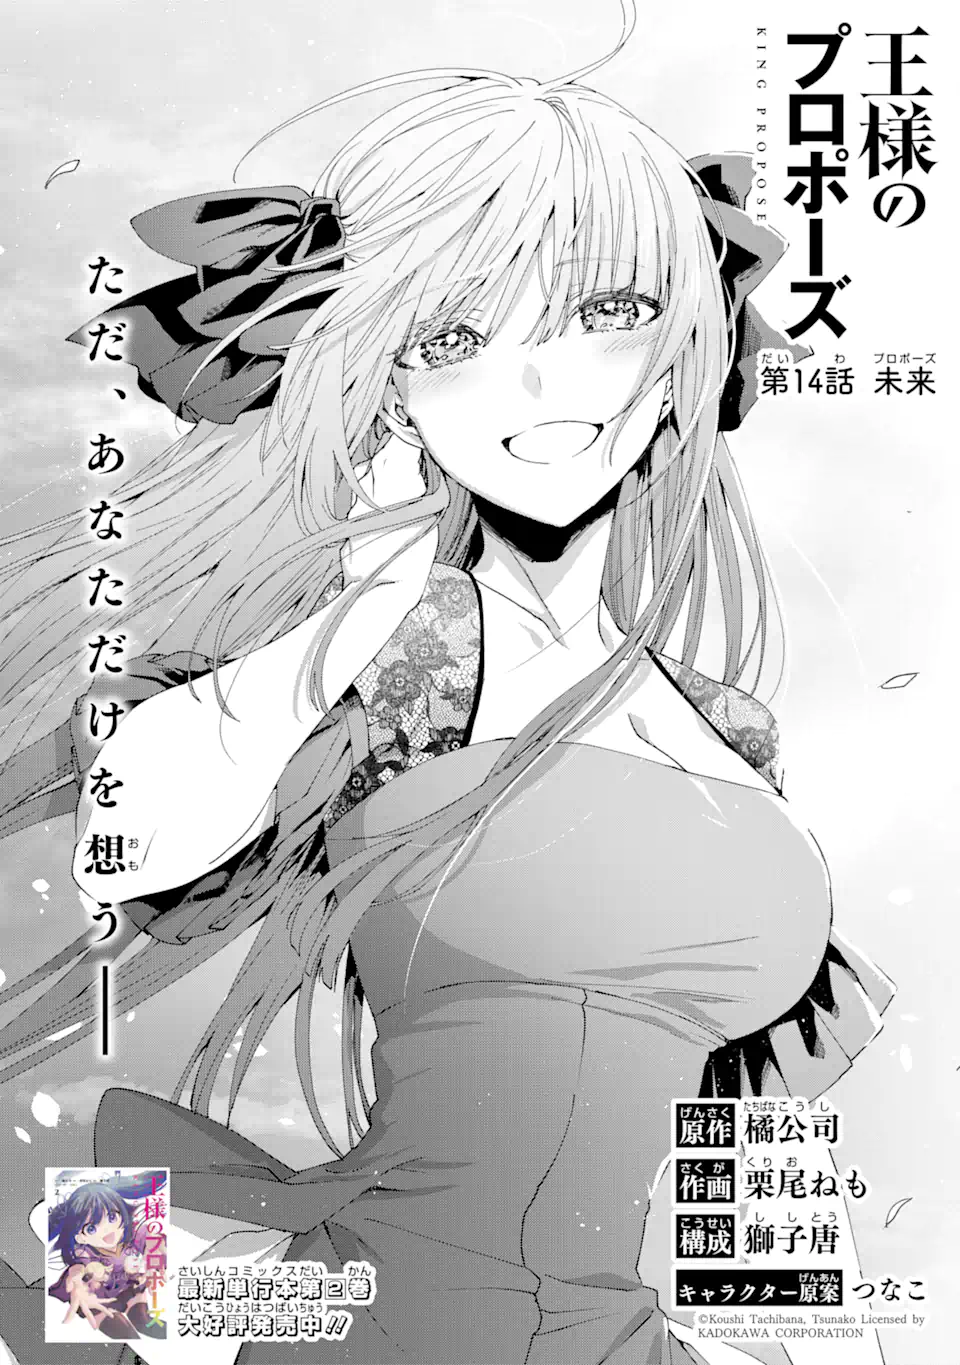 Ousama no Propose - Chapter 14.1 - Page 13